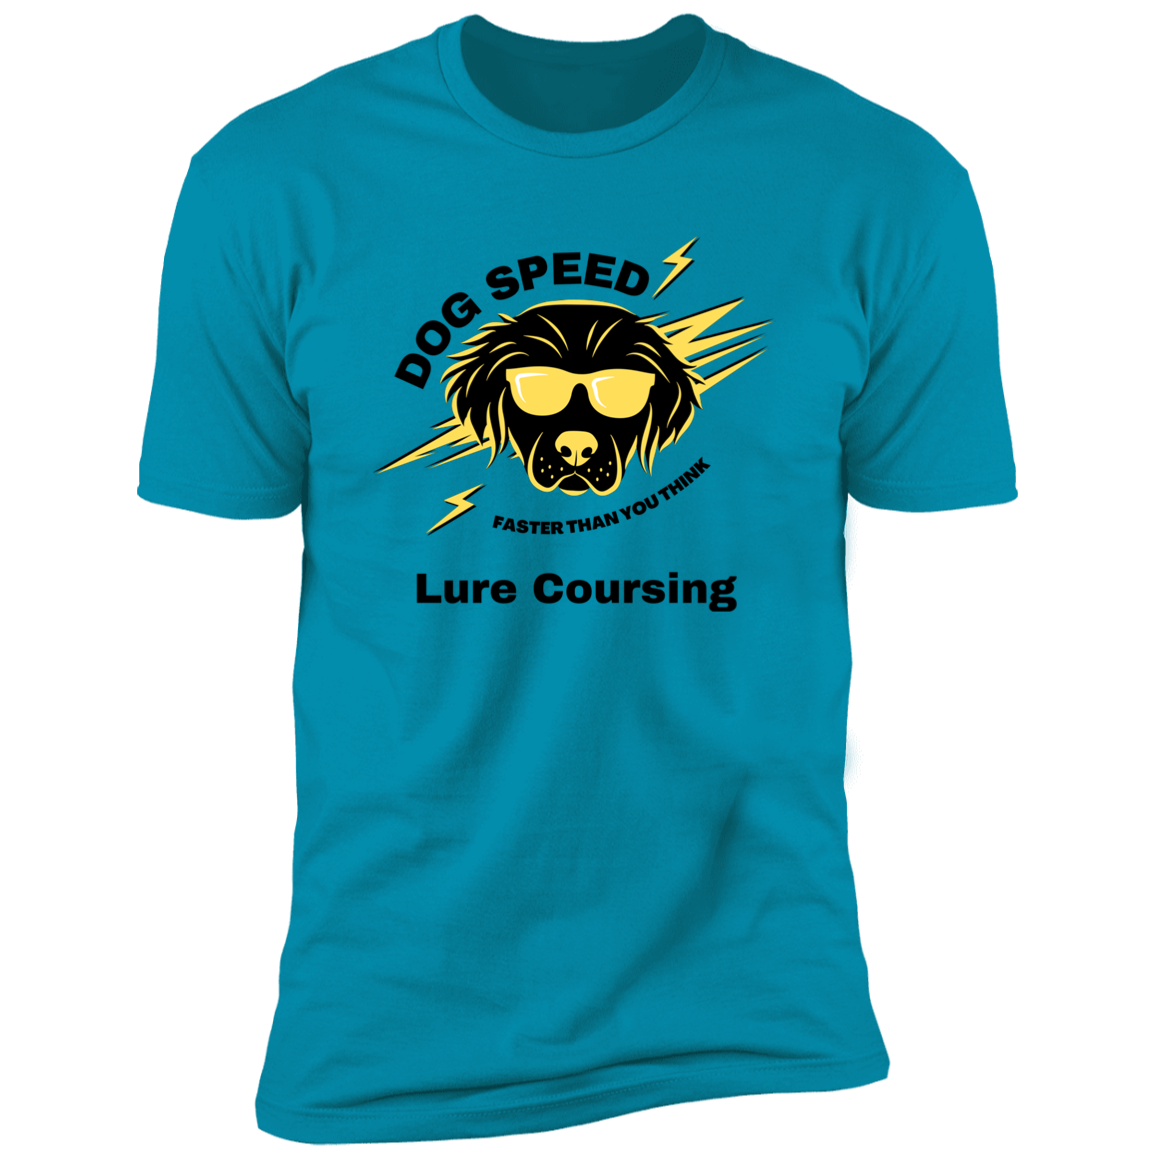 Dog Speed Faster Than You Think Lure Coursing T-shirt, Lure Coursing shirt dog shirt for humans, in turquoise